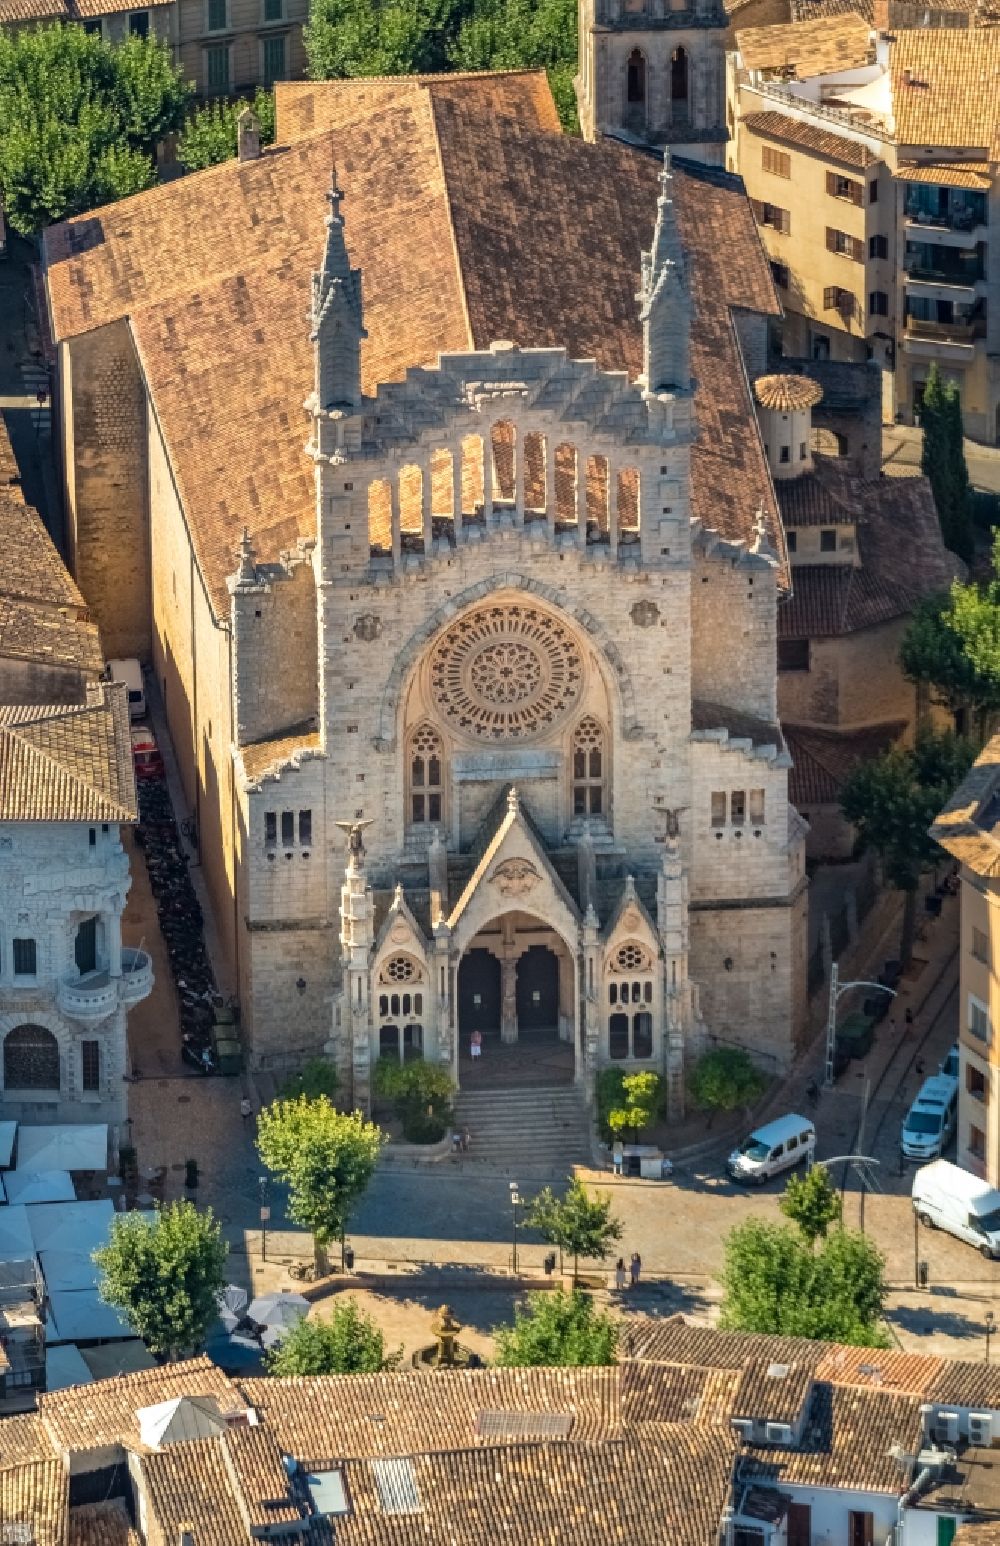 Soller from the bird's eye view: Church building St. Bartholomaeus on Plaza ConstituciA?n in the village of in Soller in Balearic Islands, Spain